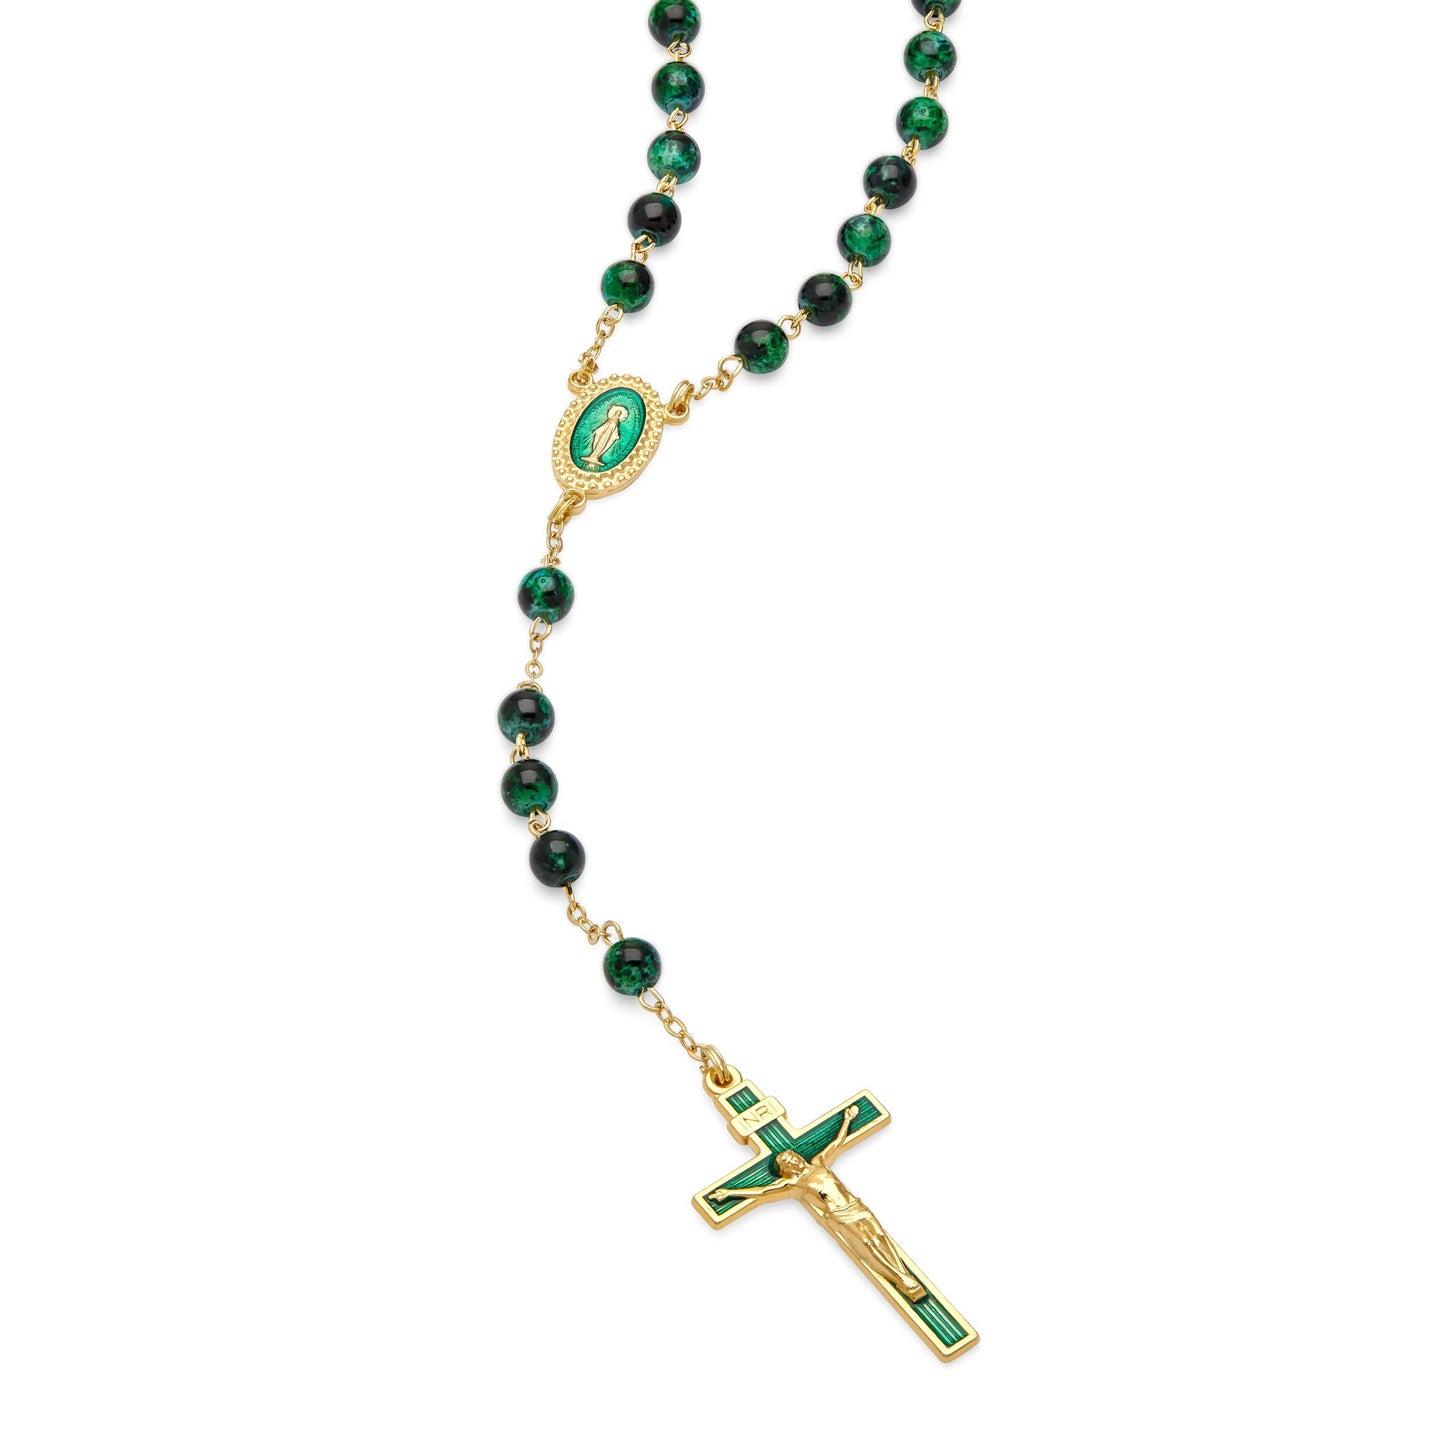 MONDO CATTOLICO Prayer Beads 48 cm (18.9 in) / 6 mm (0.23 in) Miraculous Variegated Green Glass Rosary